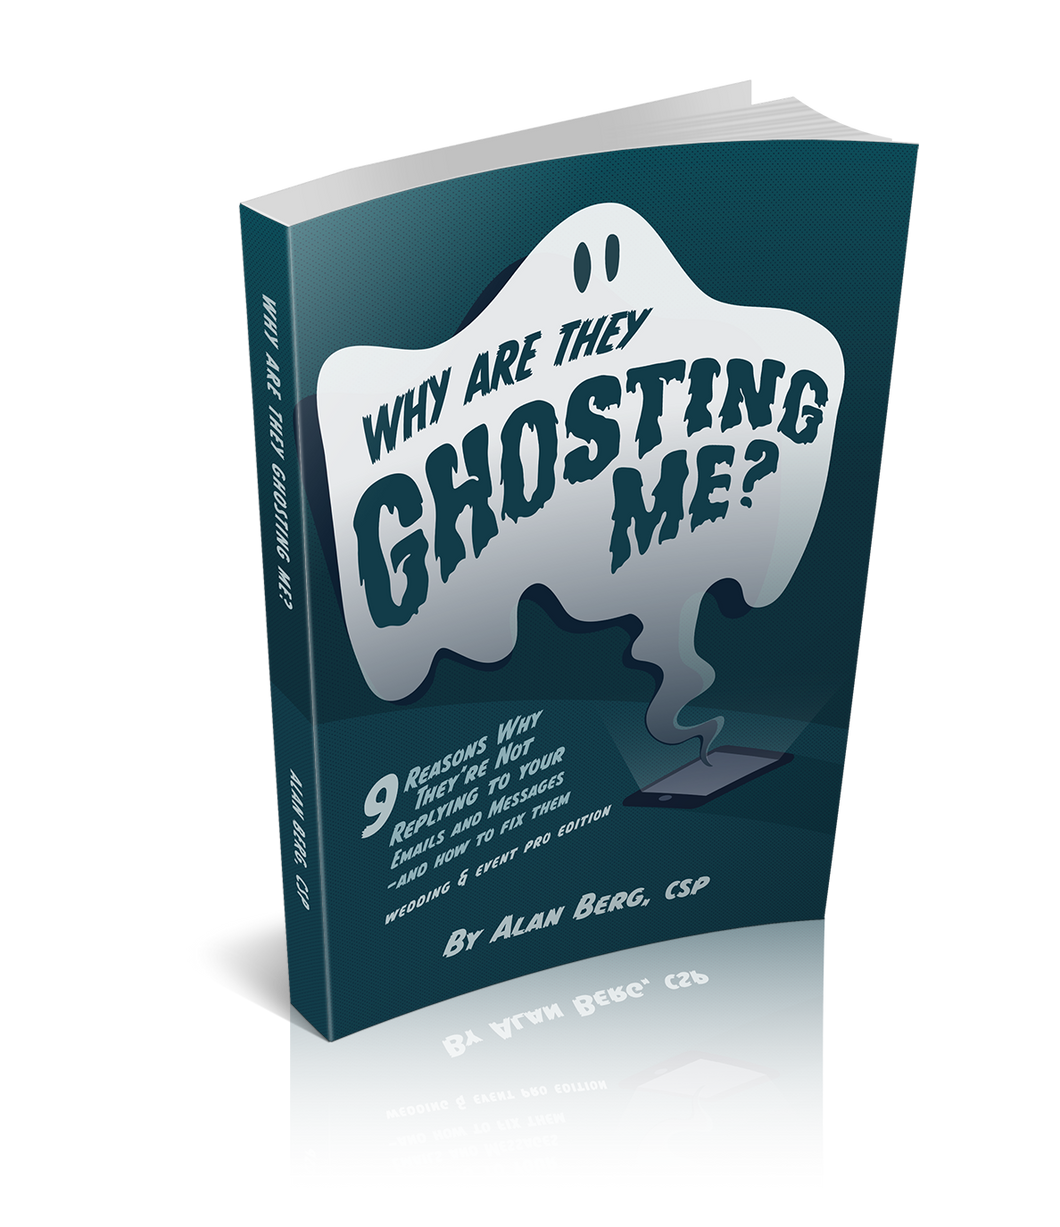 Why Are They Ghosting Me? Wedding & Event Pro Edition: 9 Reasons Why They’re Not Replying To Your Emails and Messages – and how to fix them